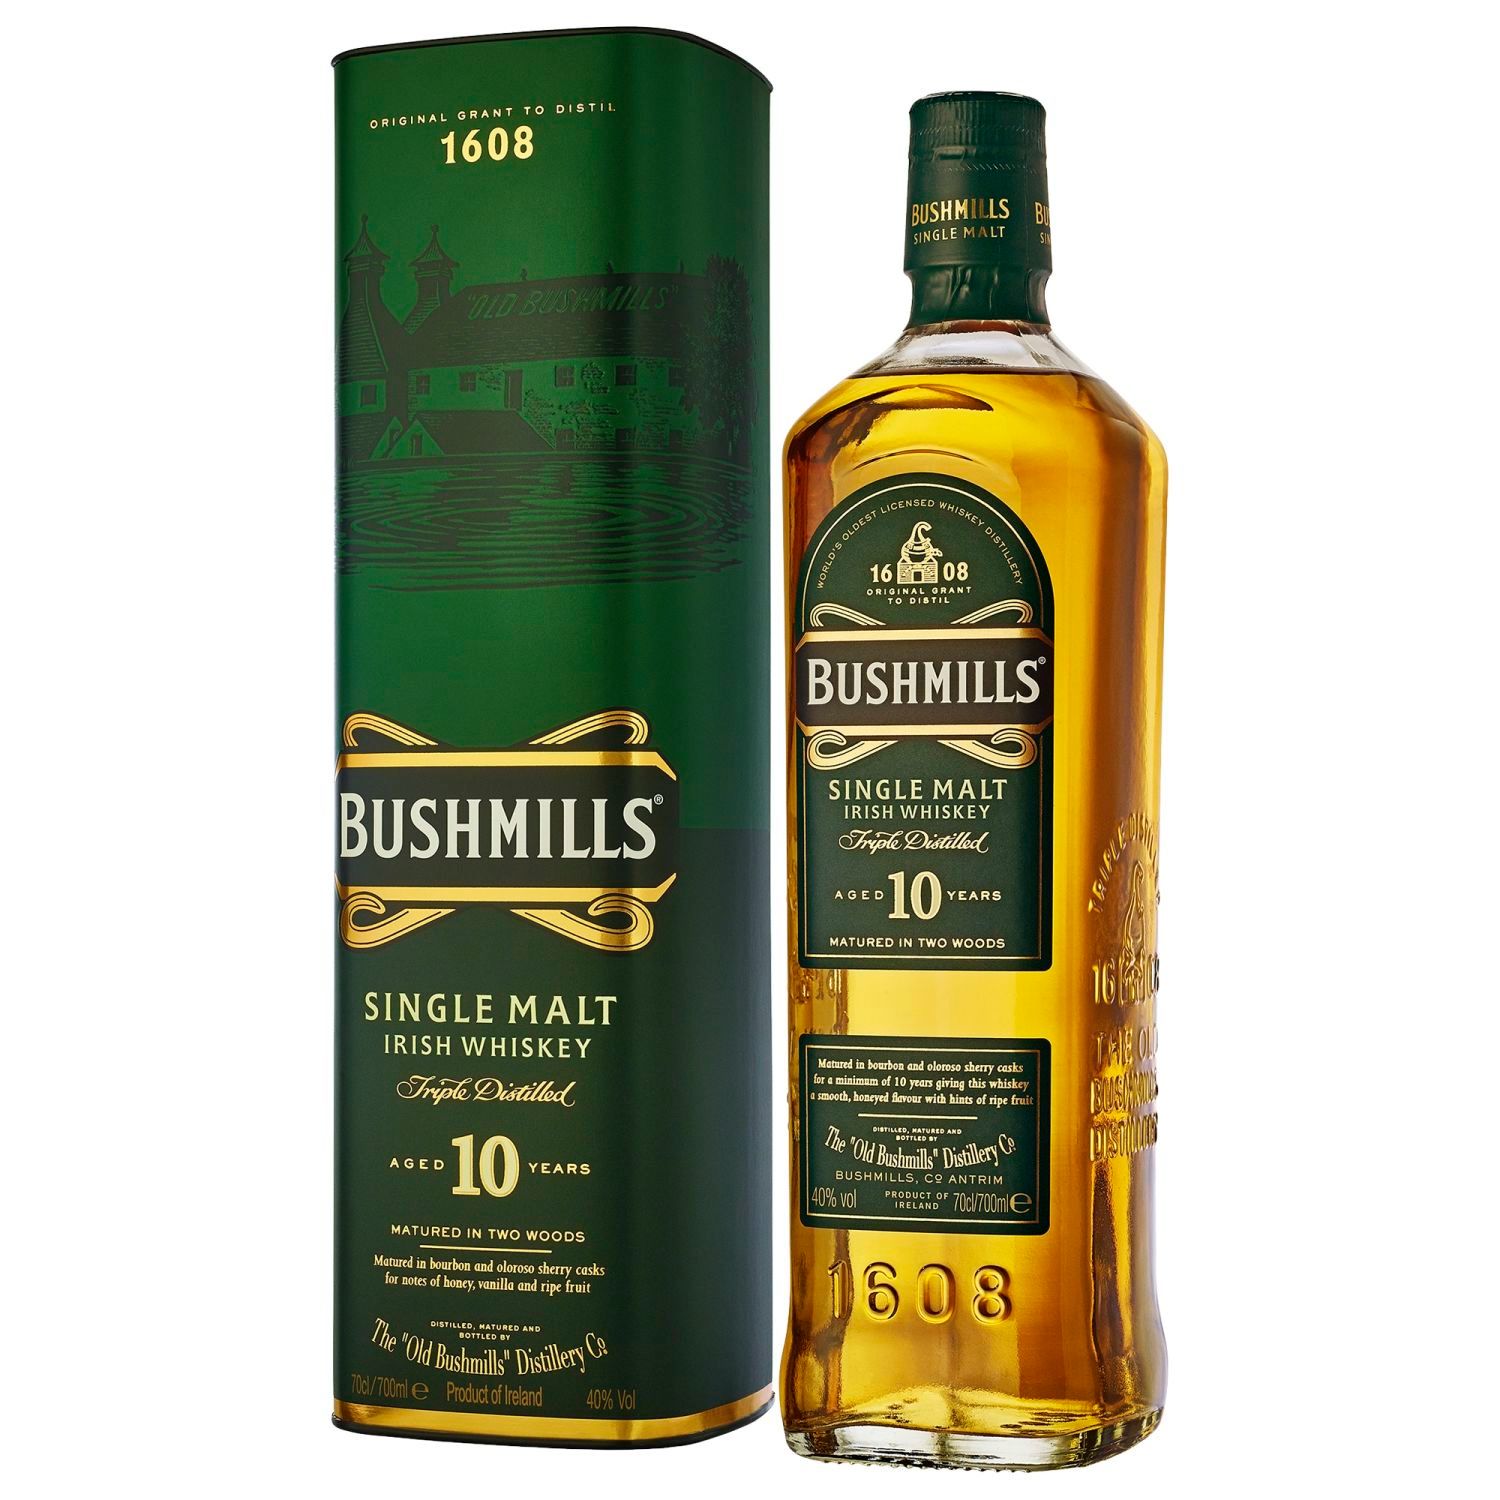 Triple distilled and aged in Oloroso sherry and American Bourbon barrels for a full-flavoured yet soft-finishing and attractive Whiskey. This classic Irish spirit is world-renowned.<br /> <br />Alcohol Volume: 40.00%<br /><br />Pack Format: Bottle<br /><br />Standard Drinks: 22</br /><br />Pack Type: Bottle<br /><br />Country of Origin: Ireland<br />